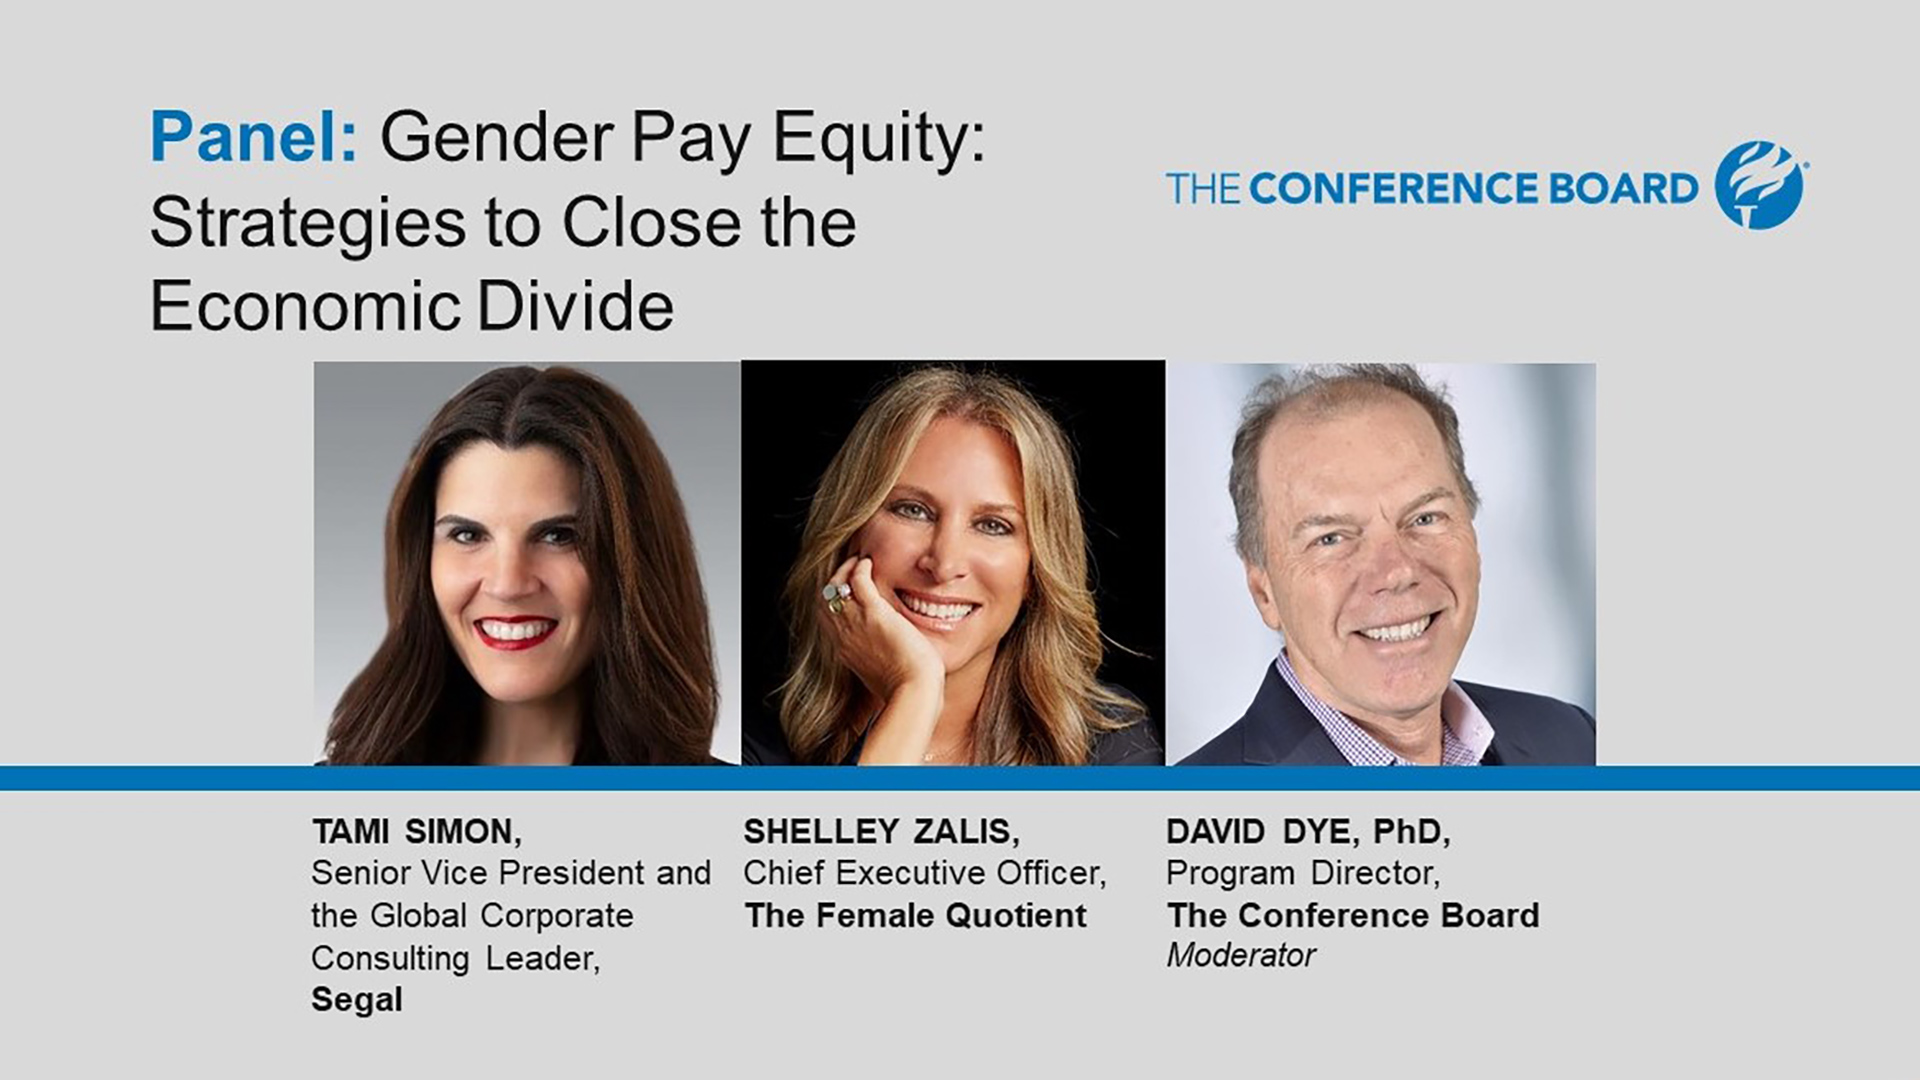 Building a More Civil & Just Society: Session C - Gender Pay Equity: Strategies to Close the Economic Divide. 33 Mins